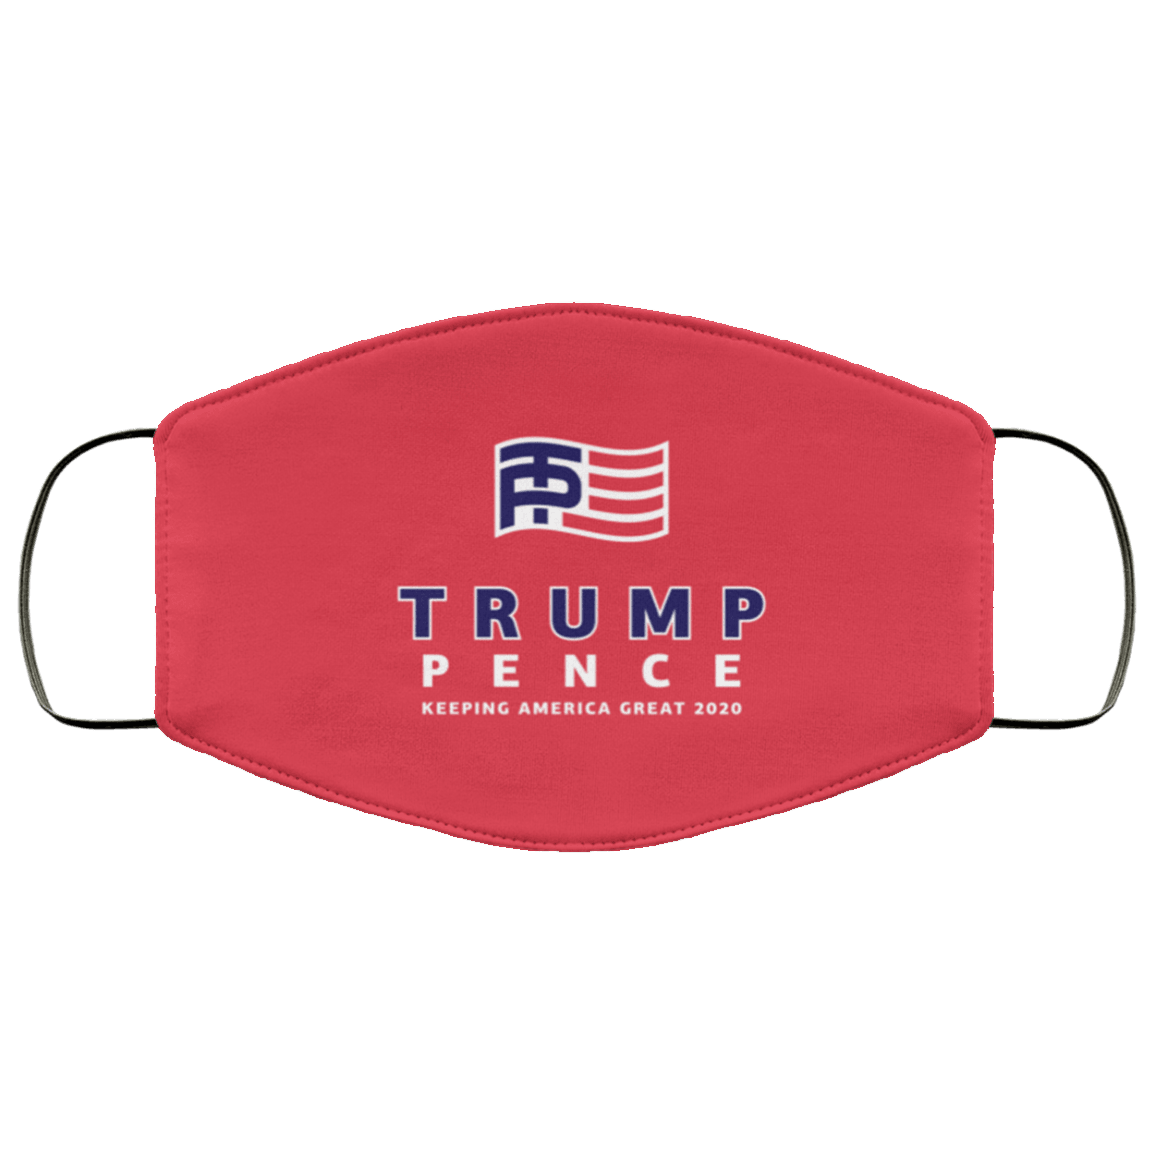 Designs by MyUtopia Shout Out:Trump Pence Keeping America Great 2020 Adult Fabric Face Mask with Elastic Ear Loops,3 Layer Fabric Face Mask / Red / Adult,Fabric Face Mask